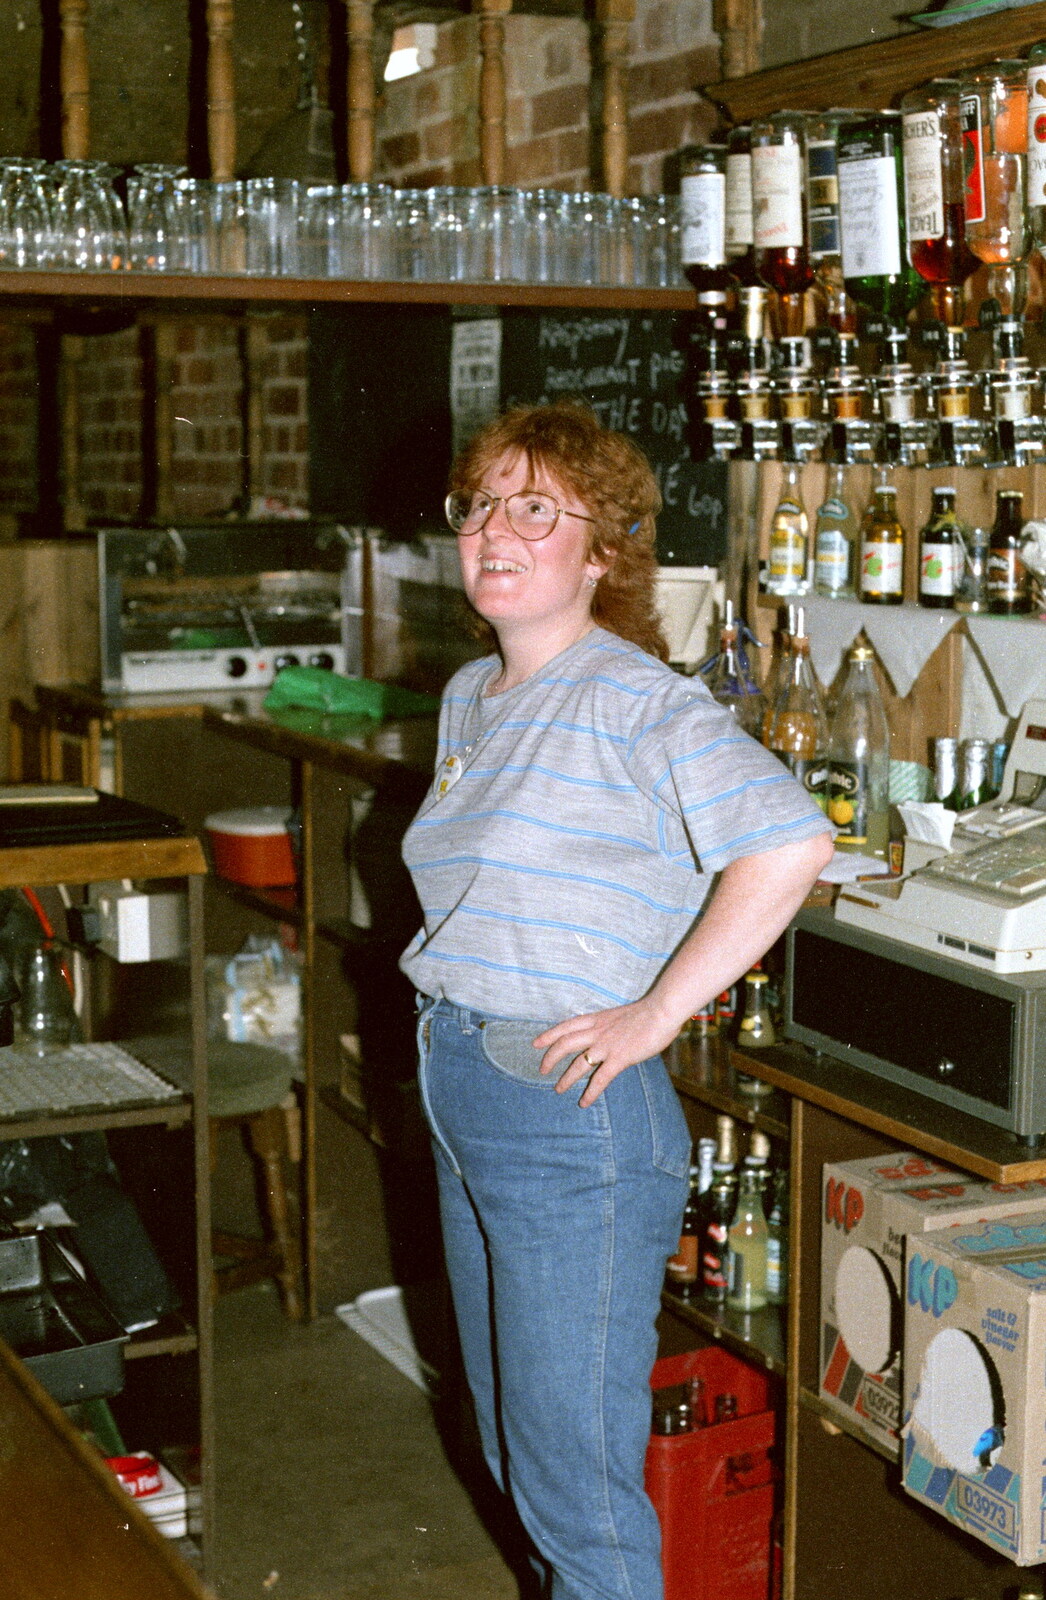 Behind the bar at the JSV from Uni: Another Session in the James Street Vaults, Plymouth - 15th April 1986